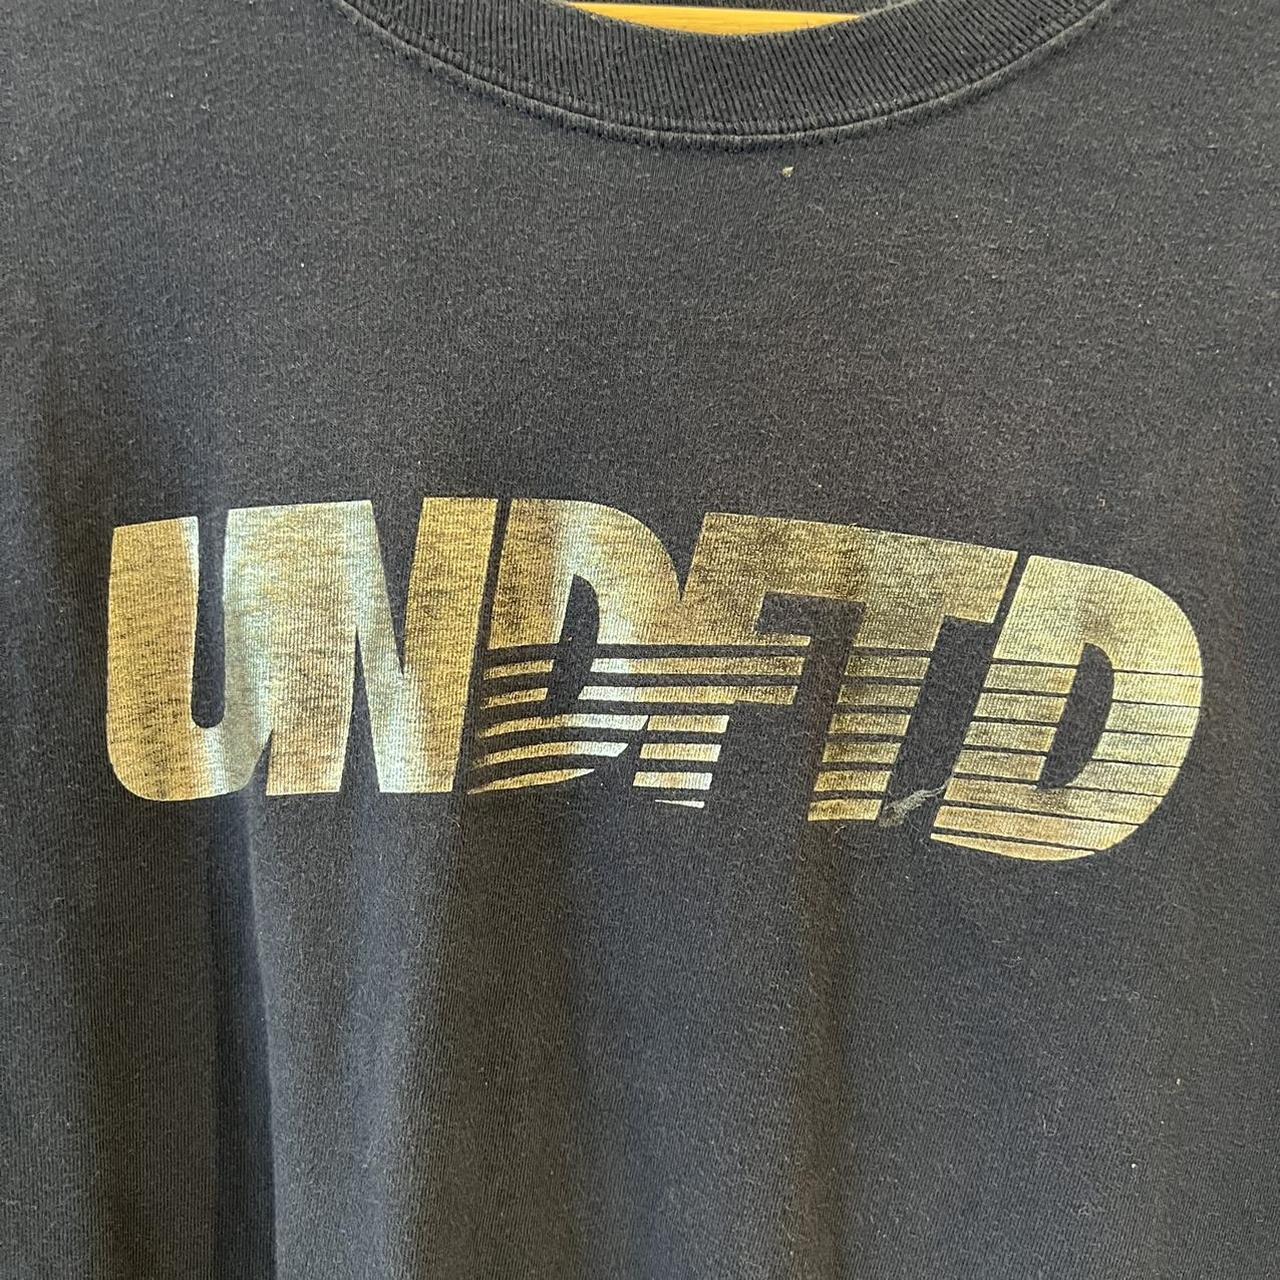 Undefeated Men's Navy and Silver T-shirt (2)